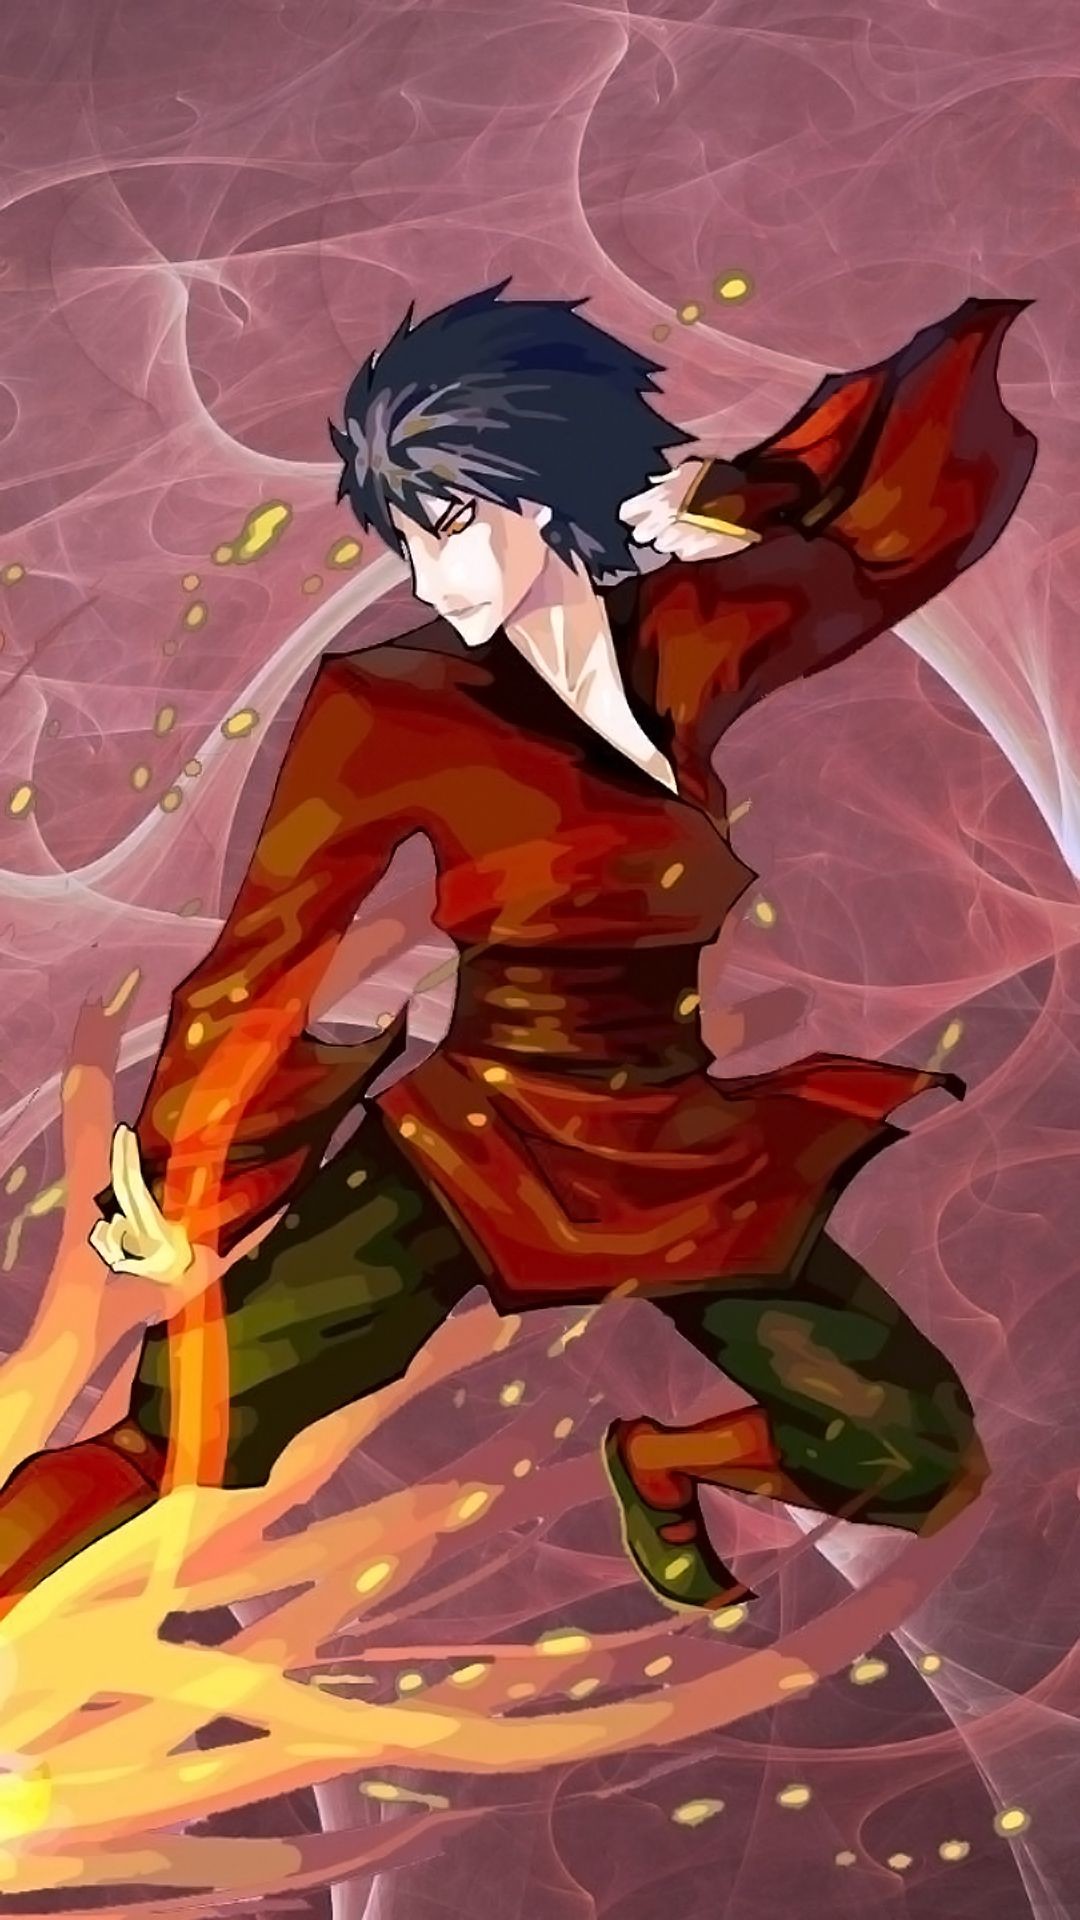 Zuko Avatar The Last Airbender Background For Android 1080x1920